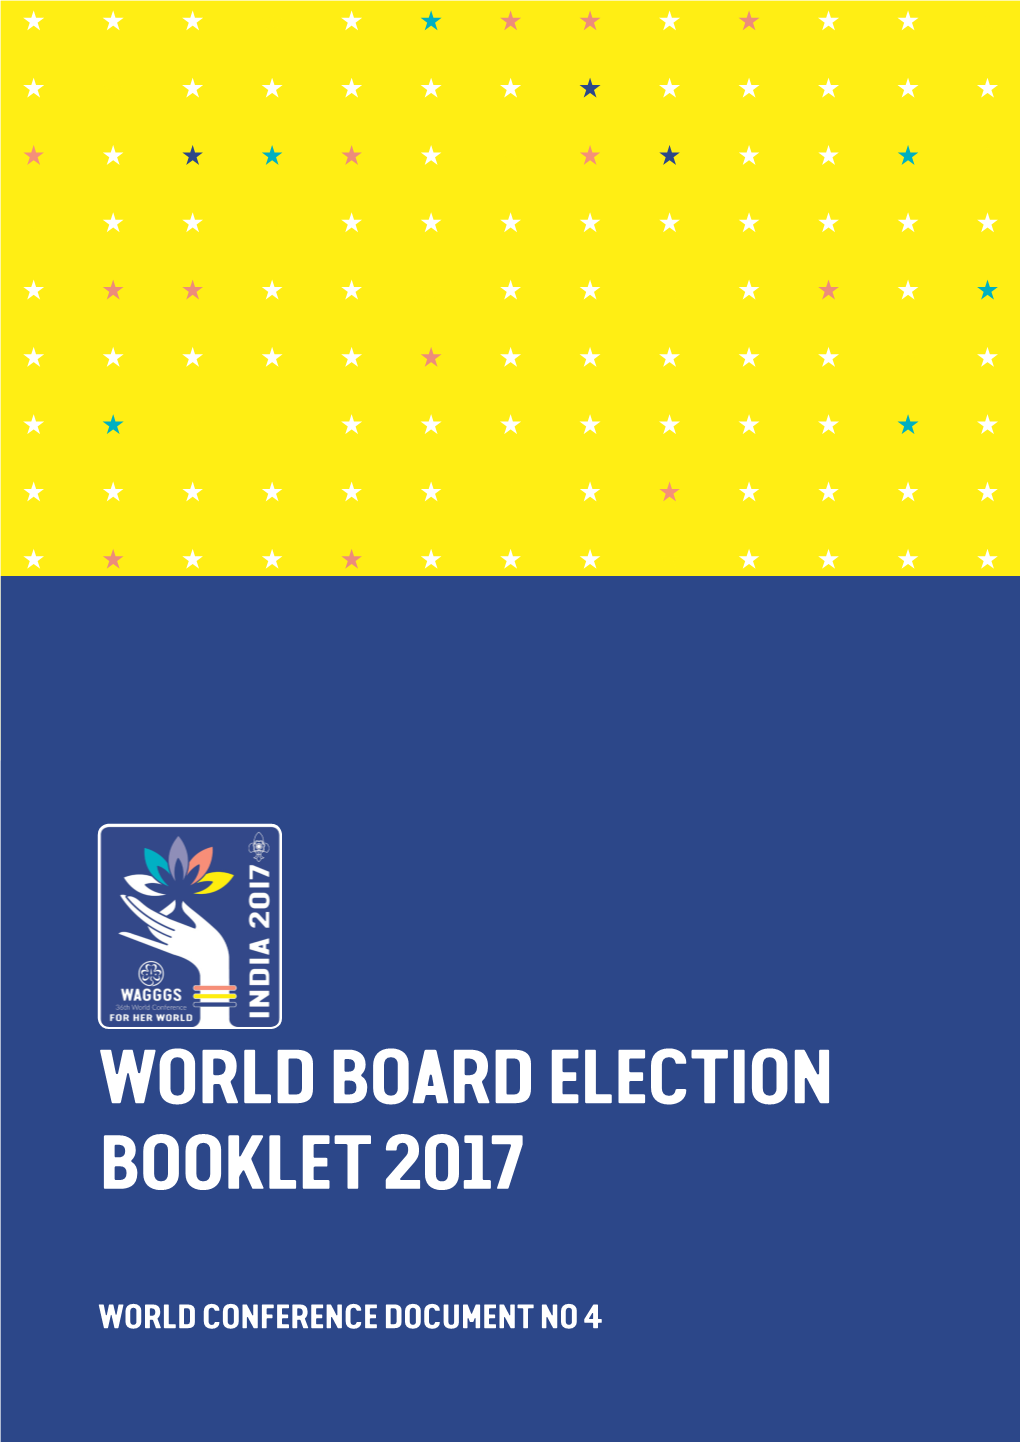 World Board Election Booklet 2017